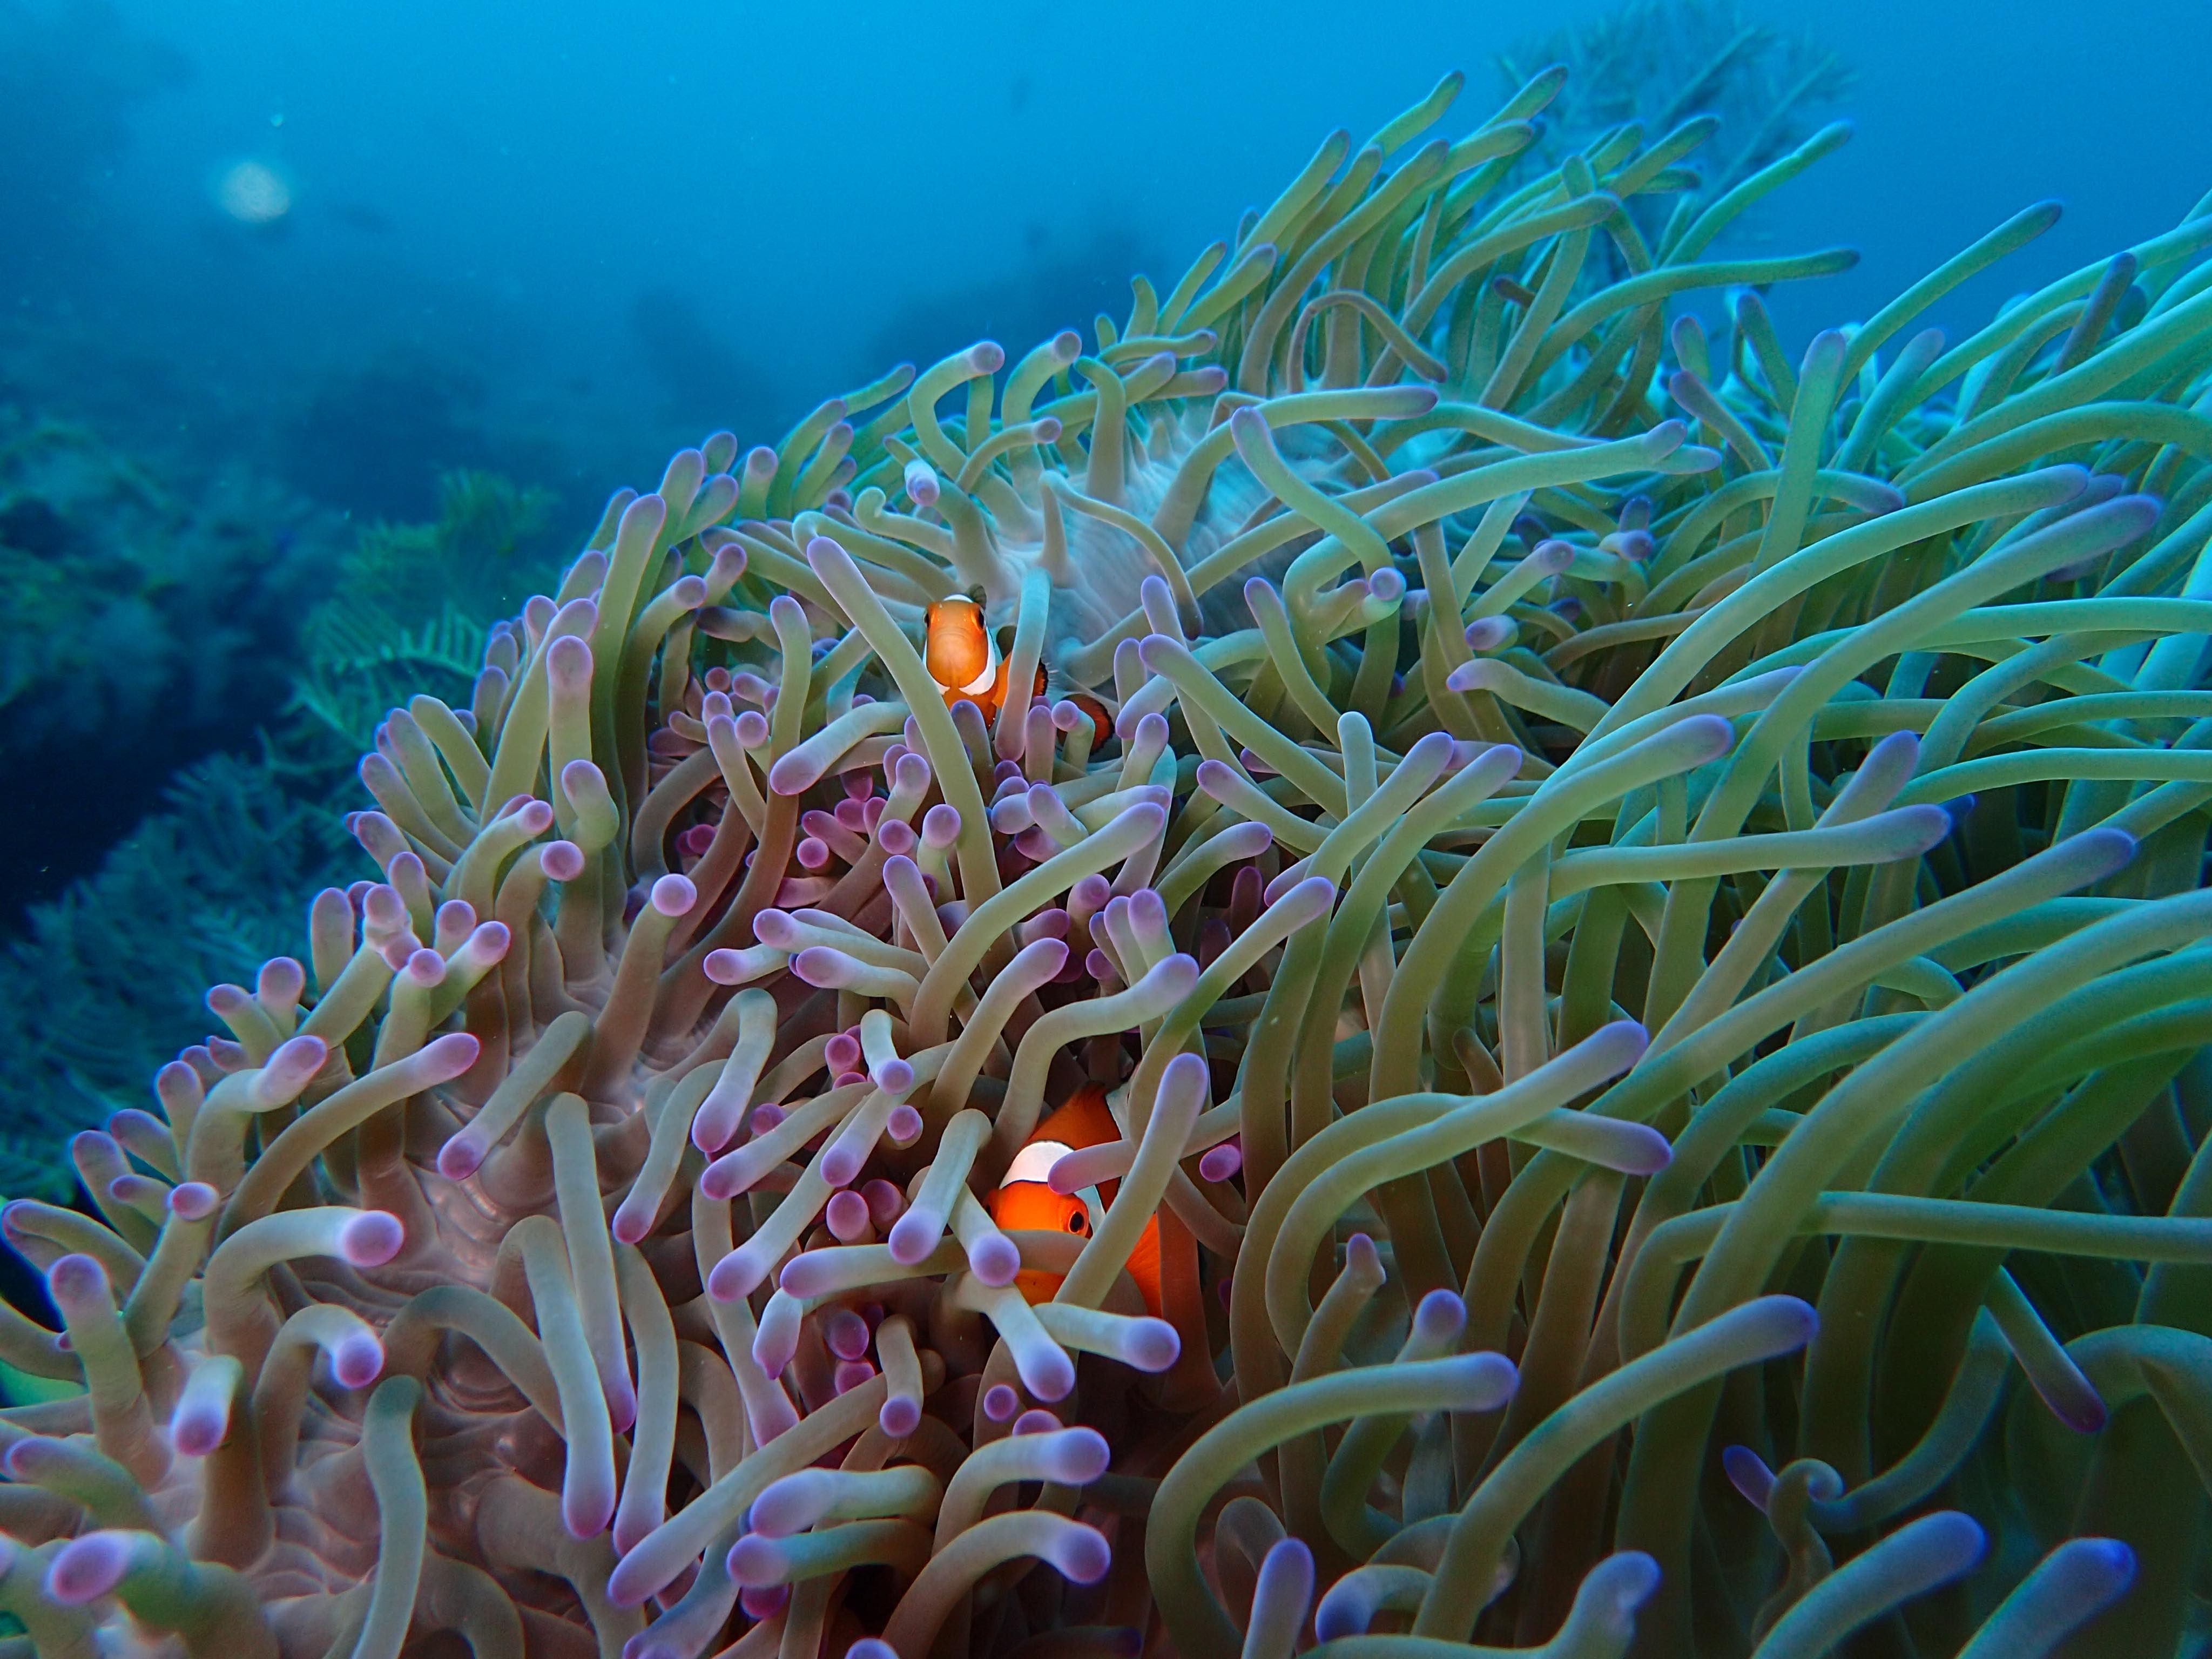 Clownfish living together in a sea anemone